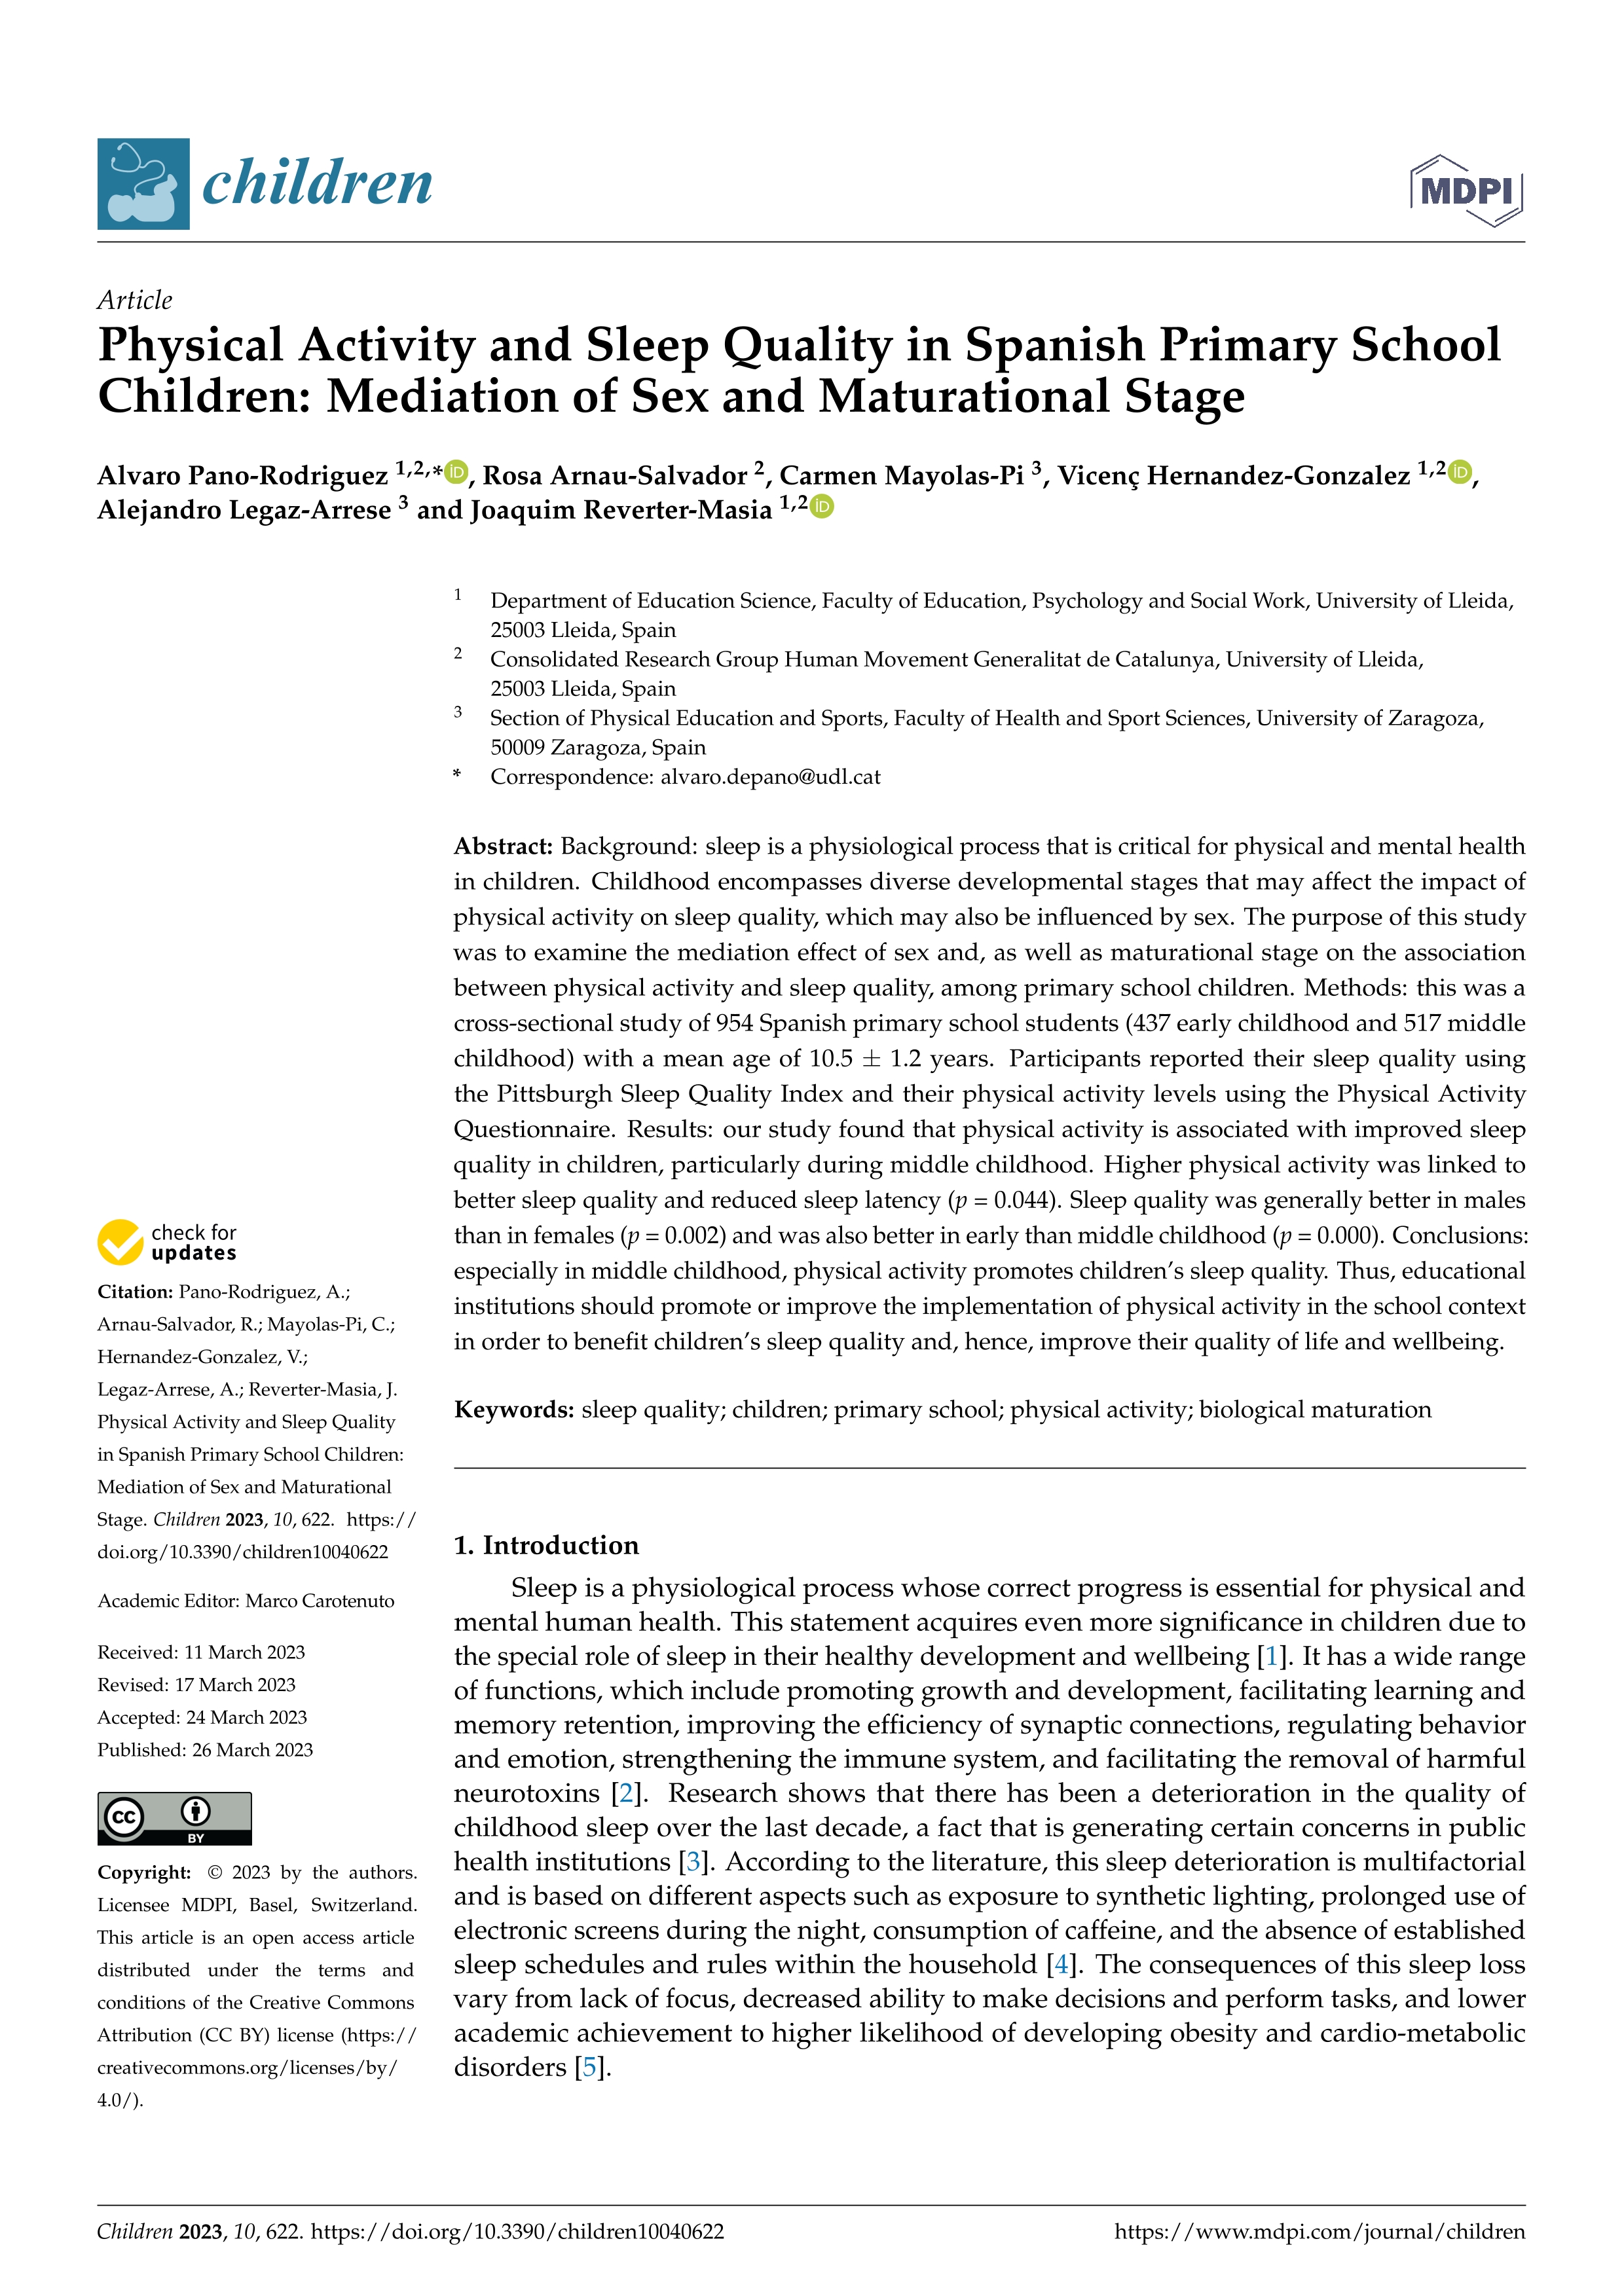 Physical activity and sleep quality in spanish primary school children: mediation of sex and maturational stage